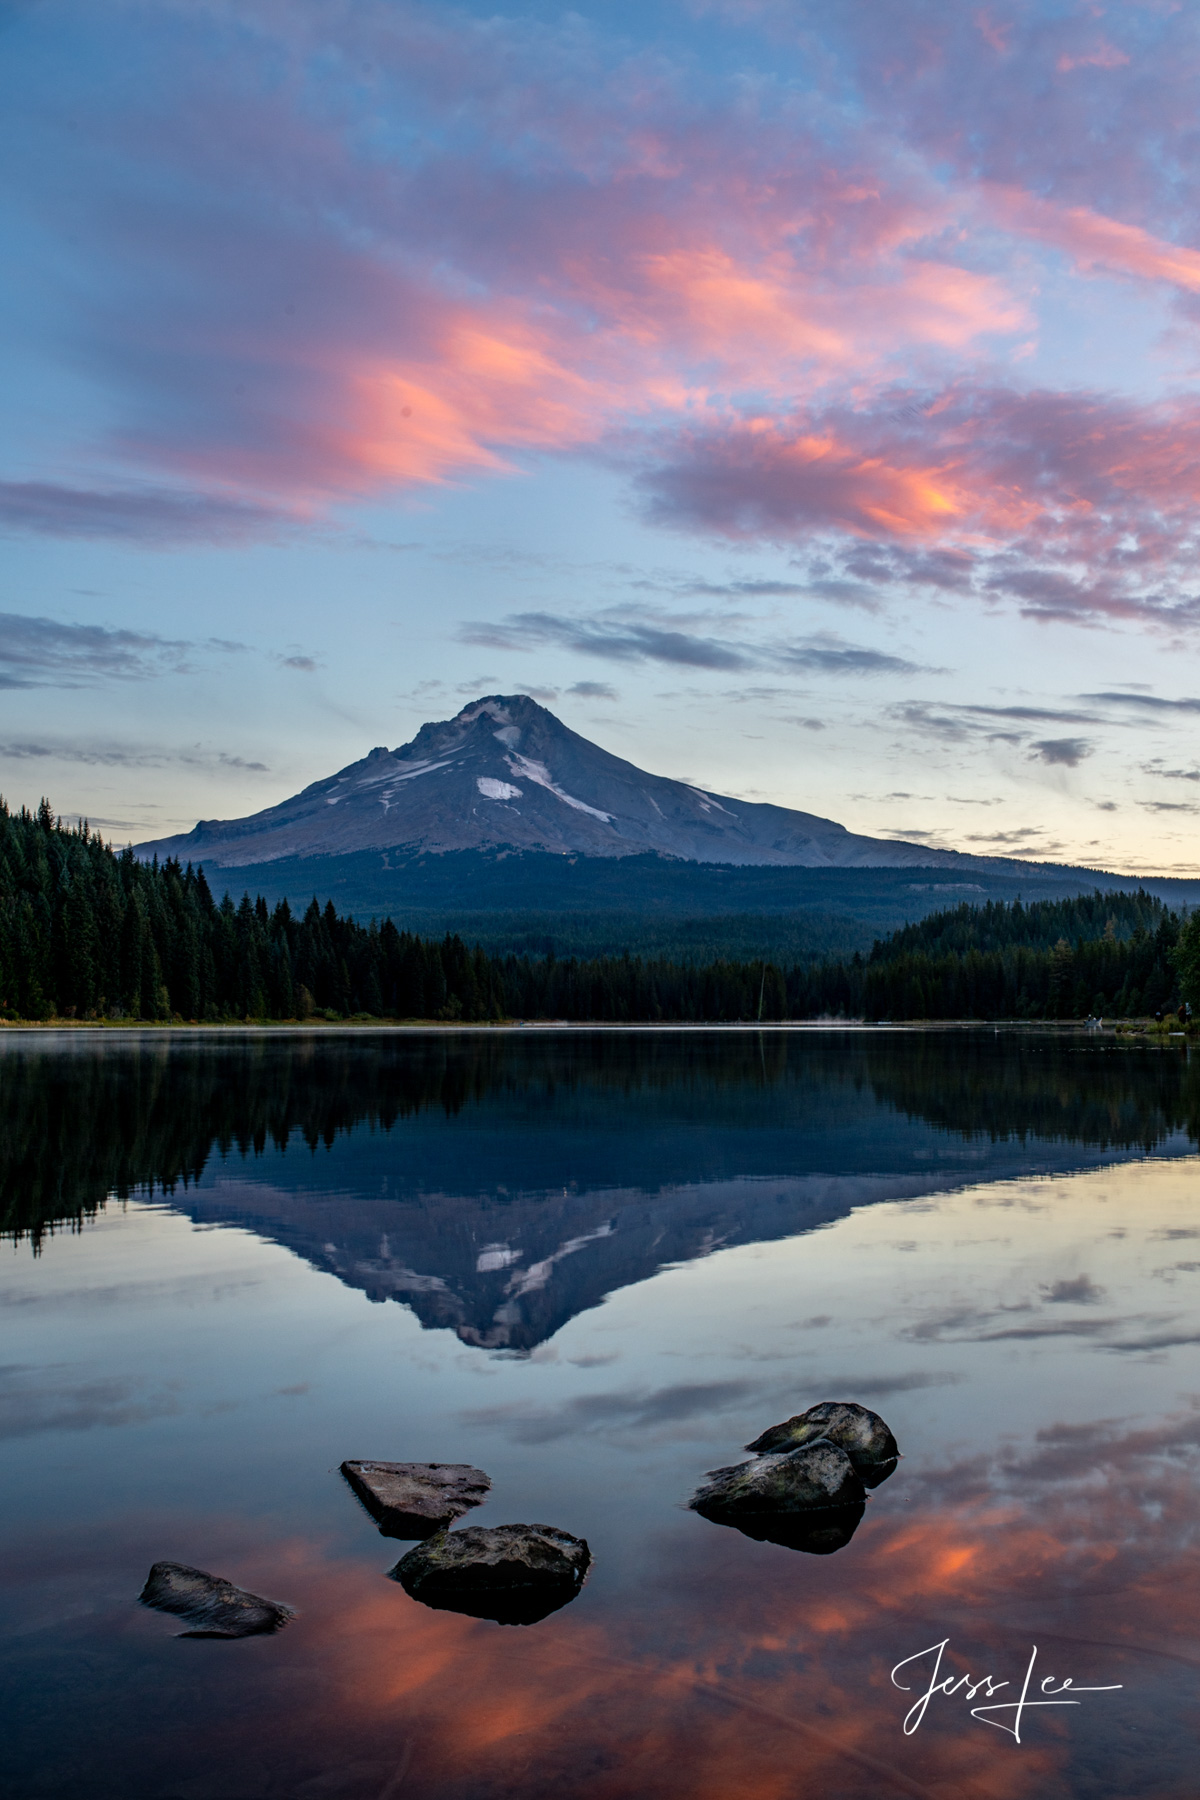 Limited Edition of 50 Exclusive high-resolution Museum Quality Fine Art Prints of Vertical mt Hood Landscapes. Photos copyright...